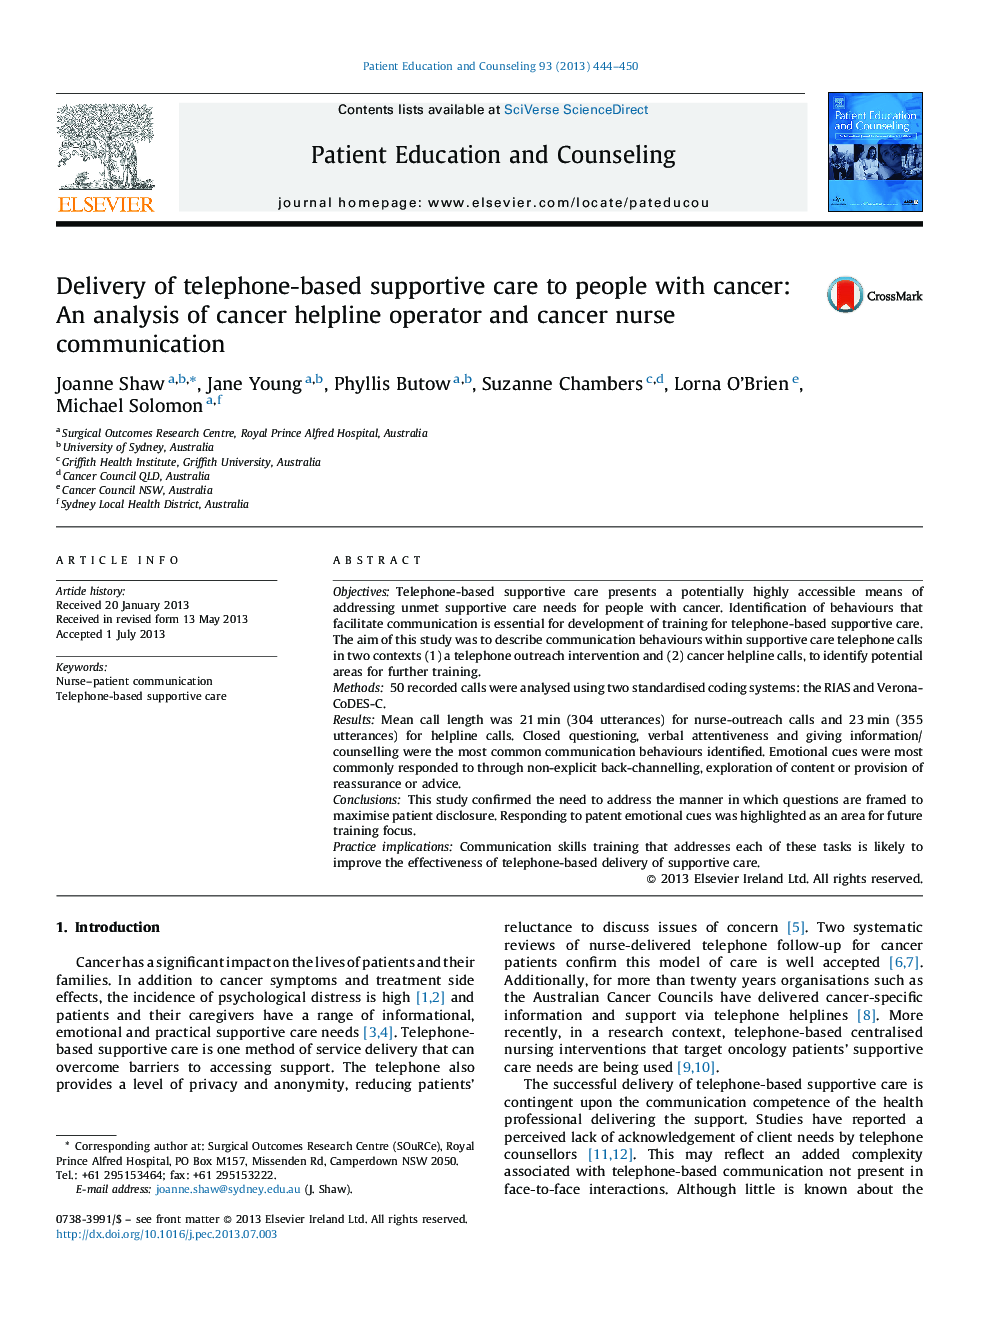 Delivery of telephone-based supportive care to people with cancer: An analysis of cancer helpline operator and cancer nurse communication